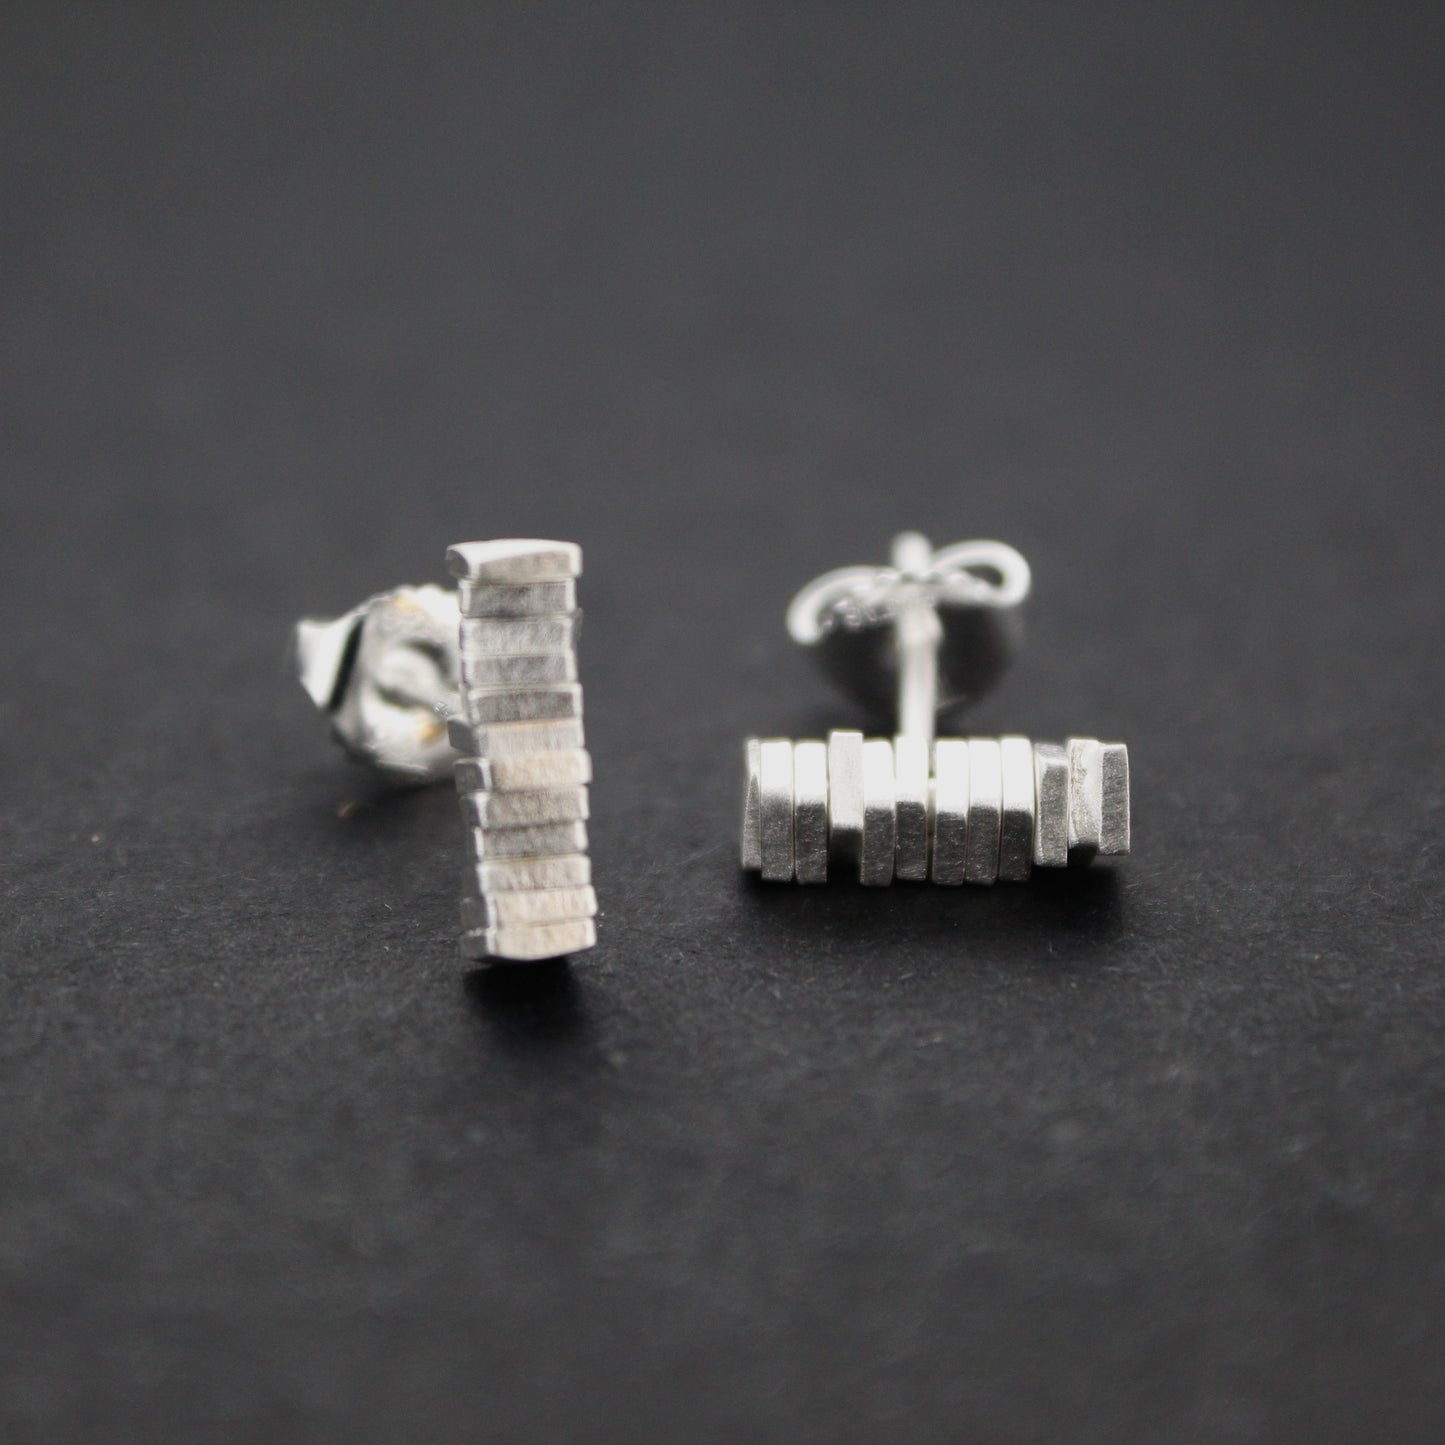 Silver Stacked Square Earrings